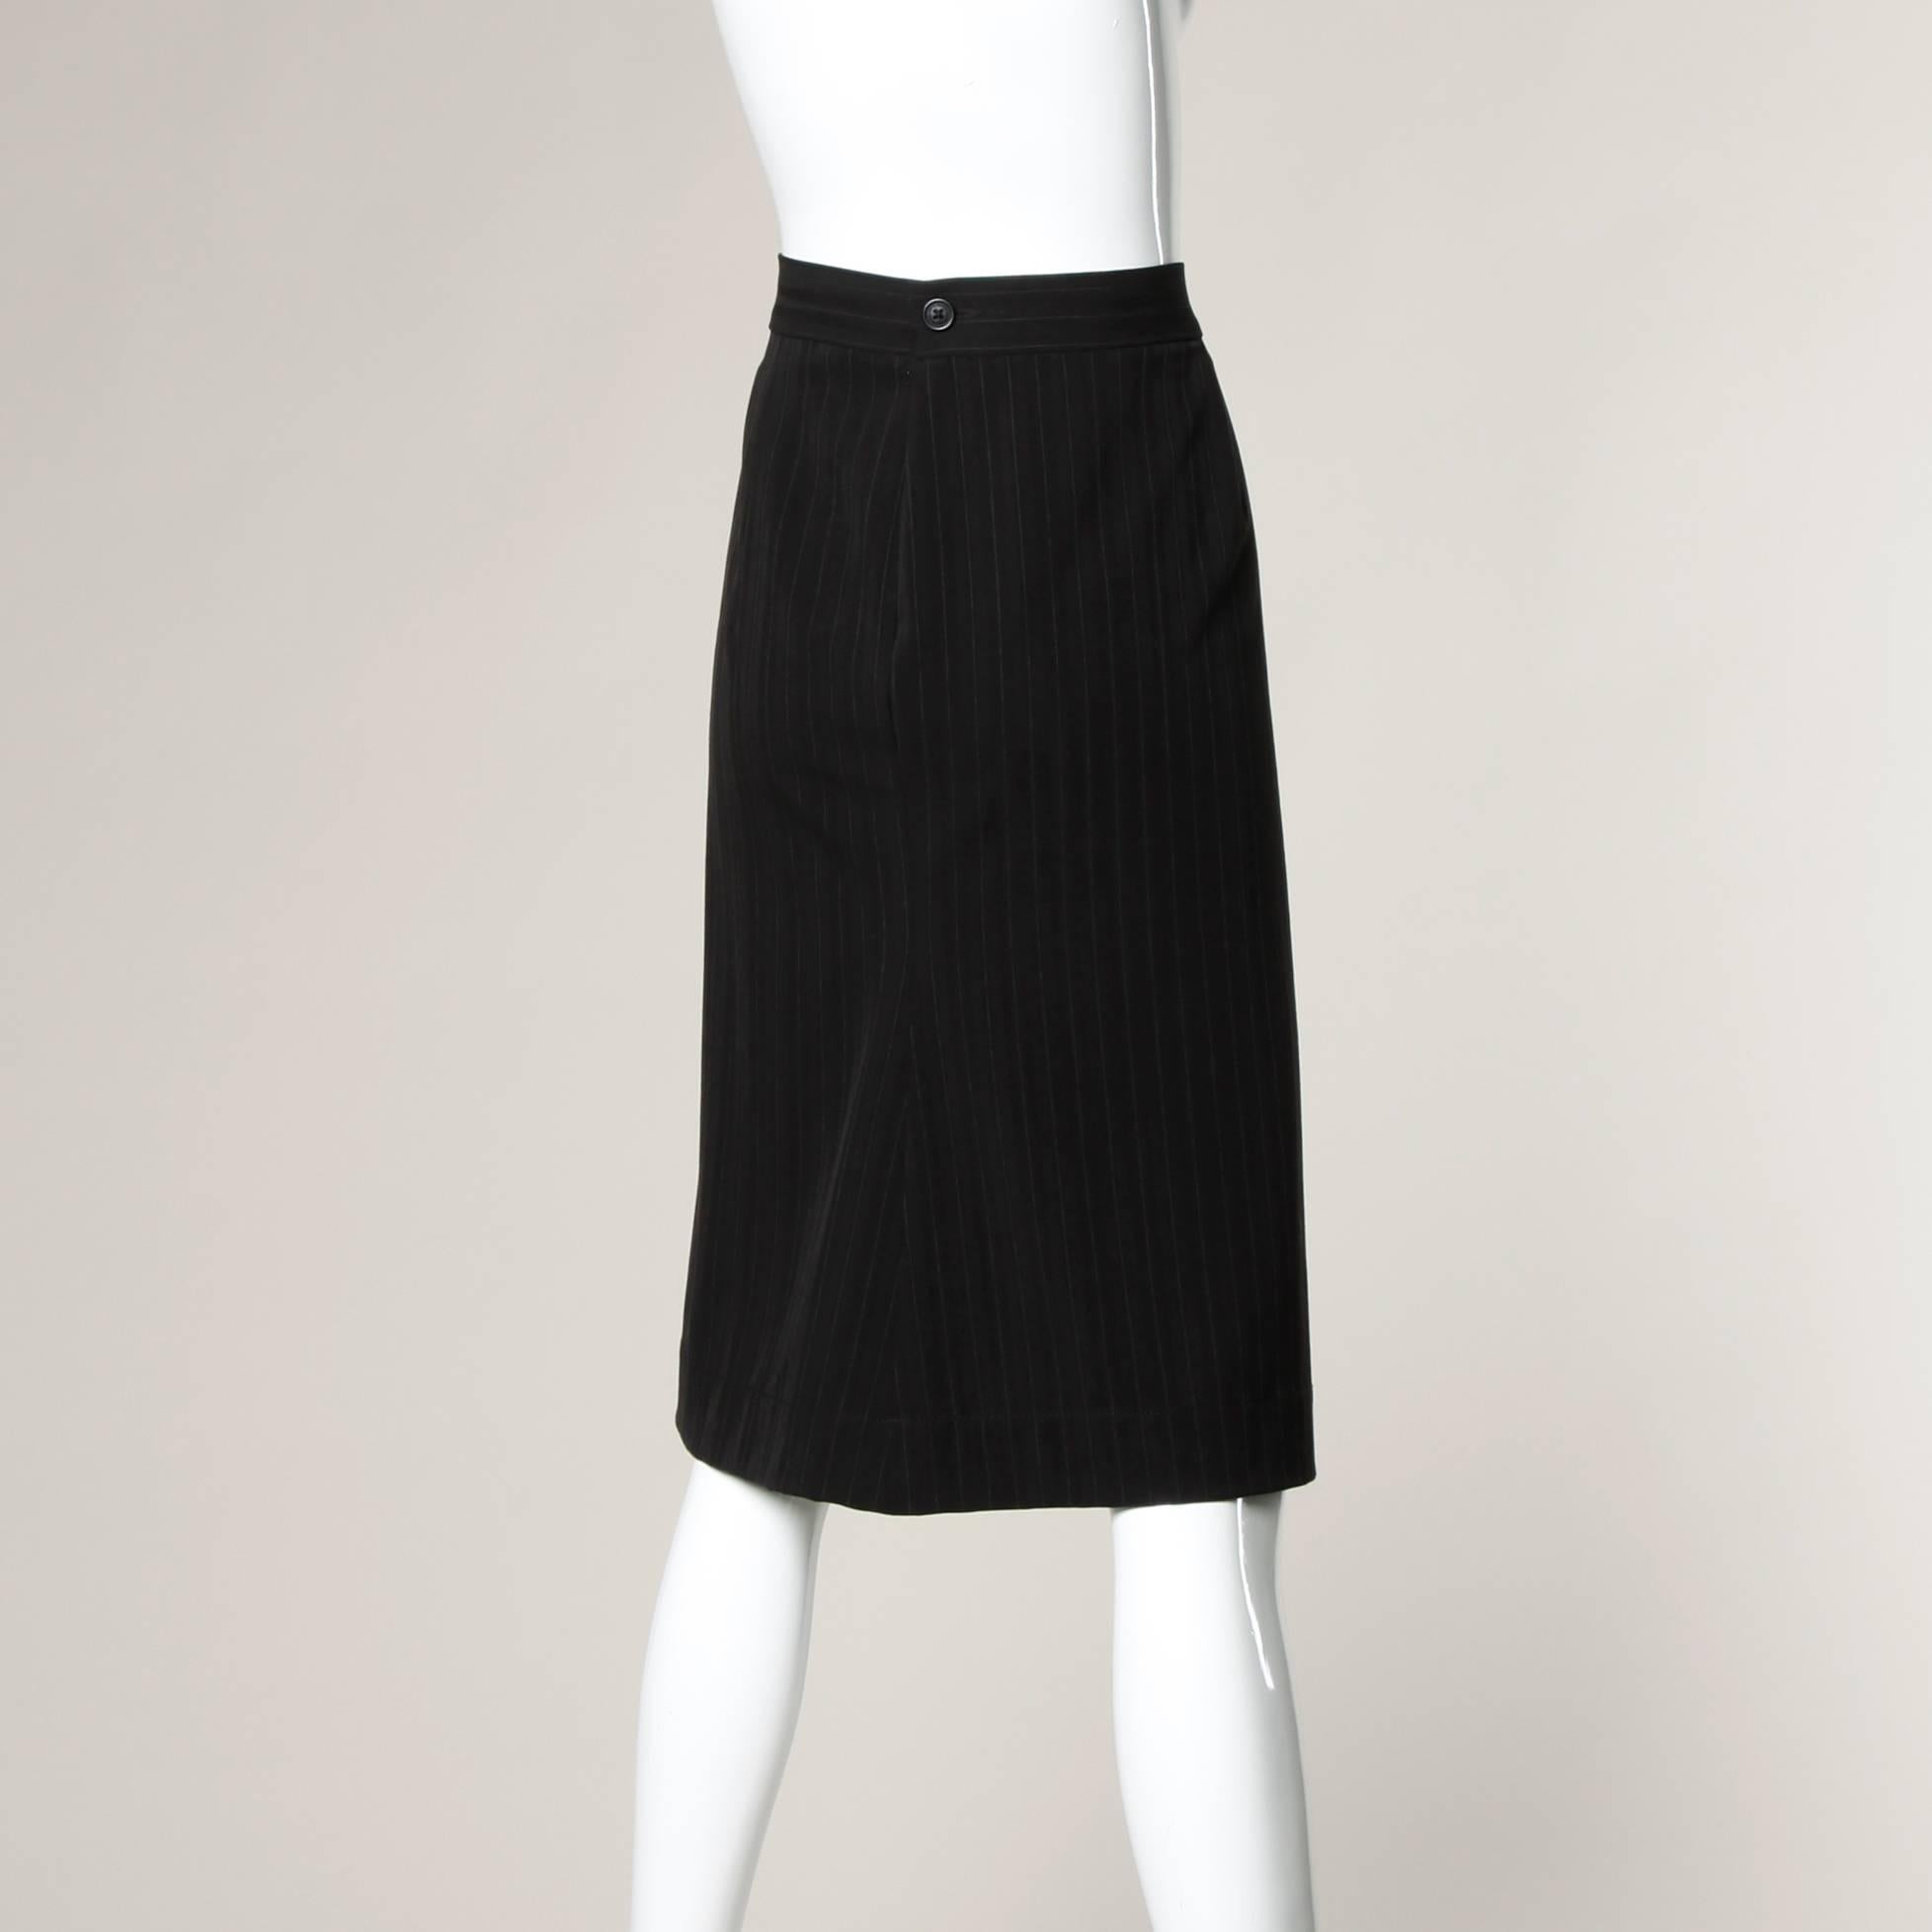 Black Unworn Vivienne Westwood Anglomania Pin Striped Skirt For Sale